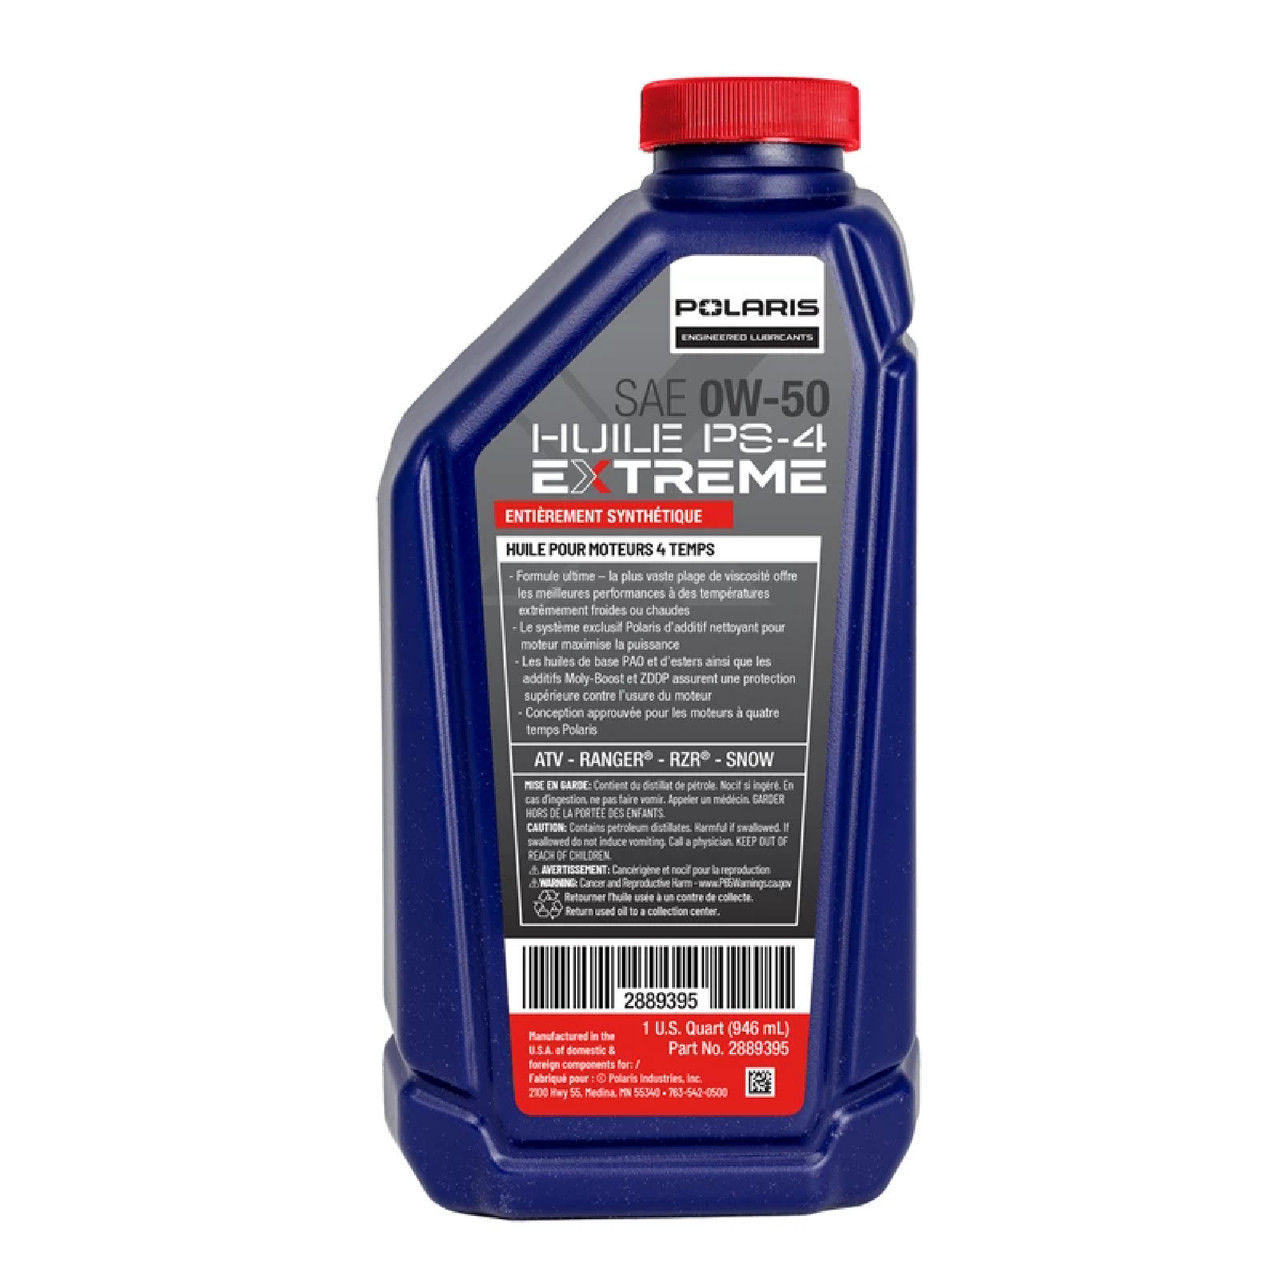 Polaris New OEM PS-4 Extreme Full Synthetic 0W-50 Engine Oil Pack of 10, 2889395